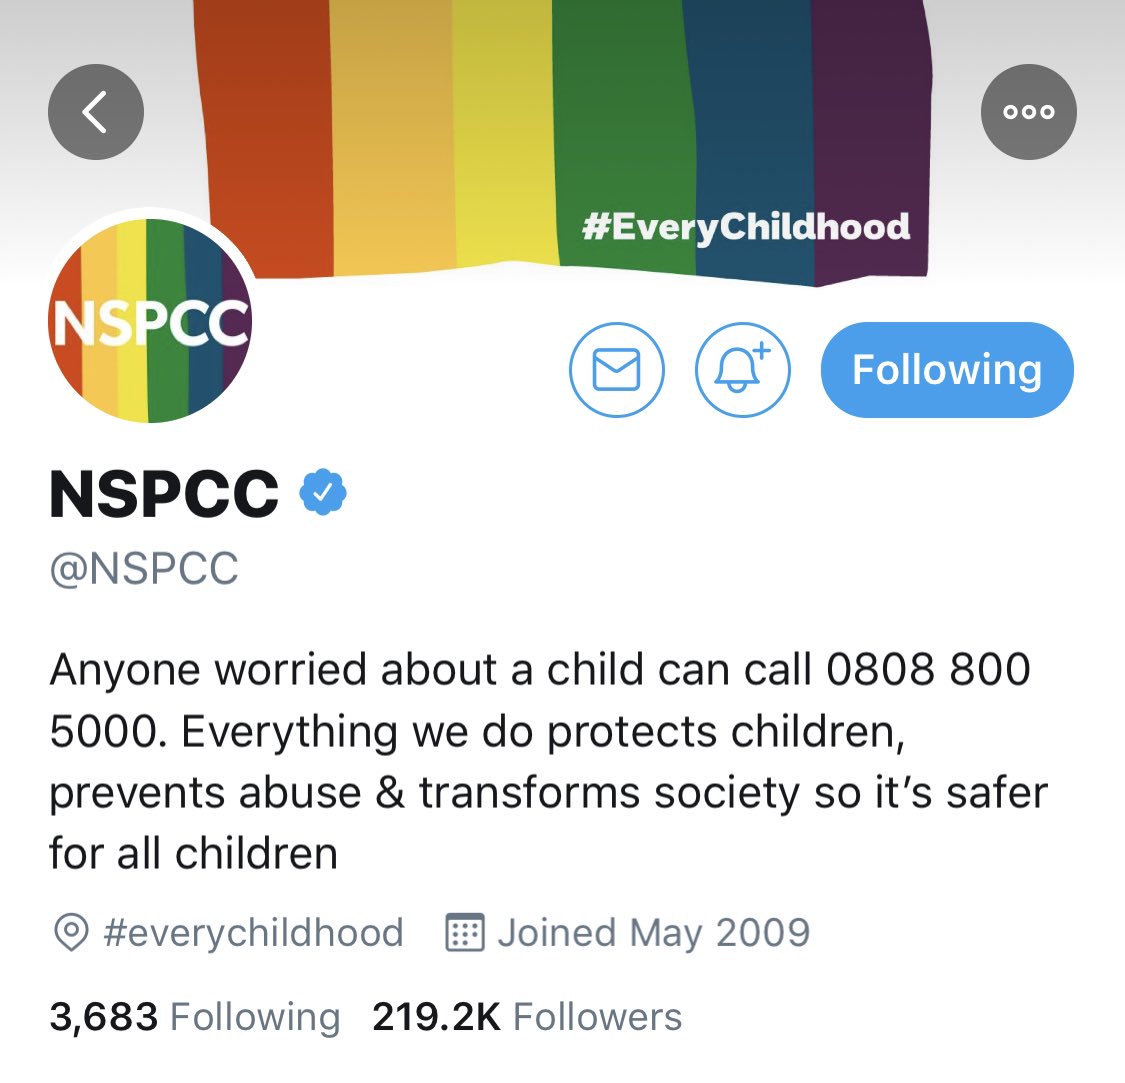 This week has witnessed yet another attack by anti-trans lobbyists towards an organisation showing support for trans people - this time  @NSPCC was targeted I’ve been studying the techniques used by trans-hostile activists, and thought I’d share my findings here.Thread....